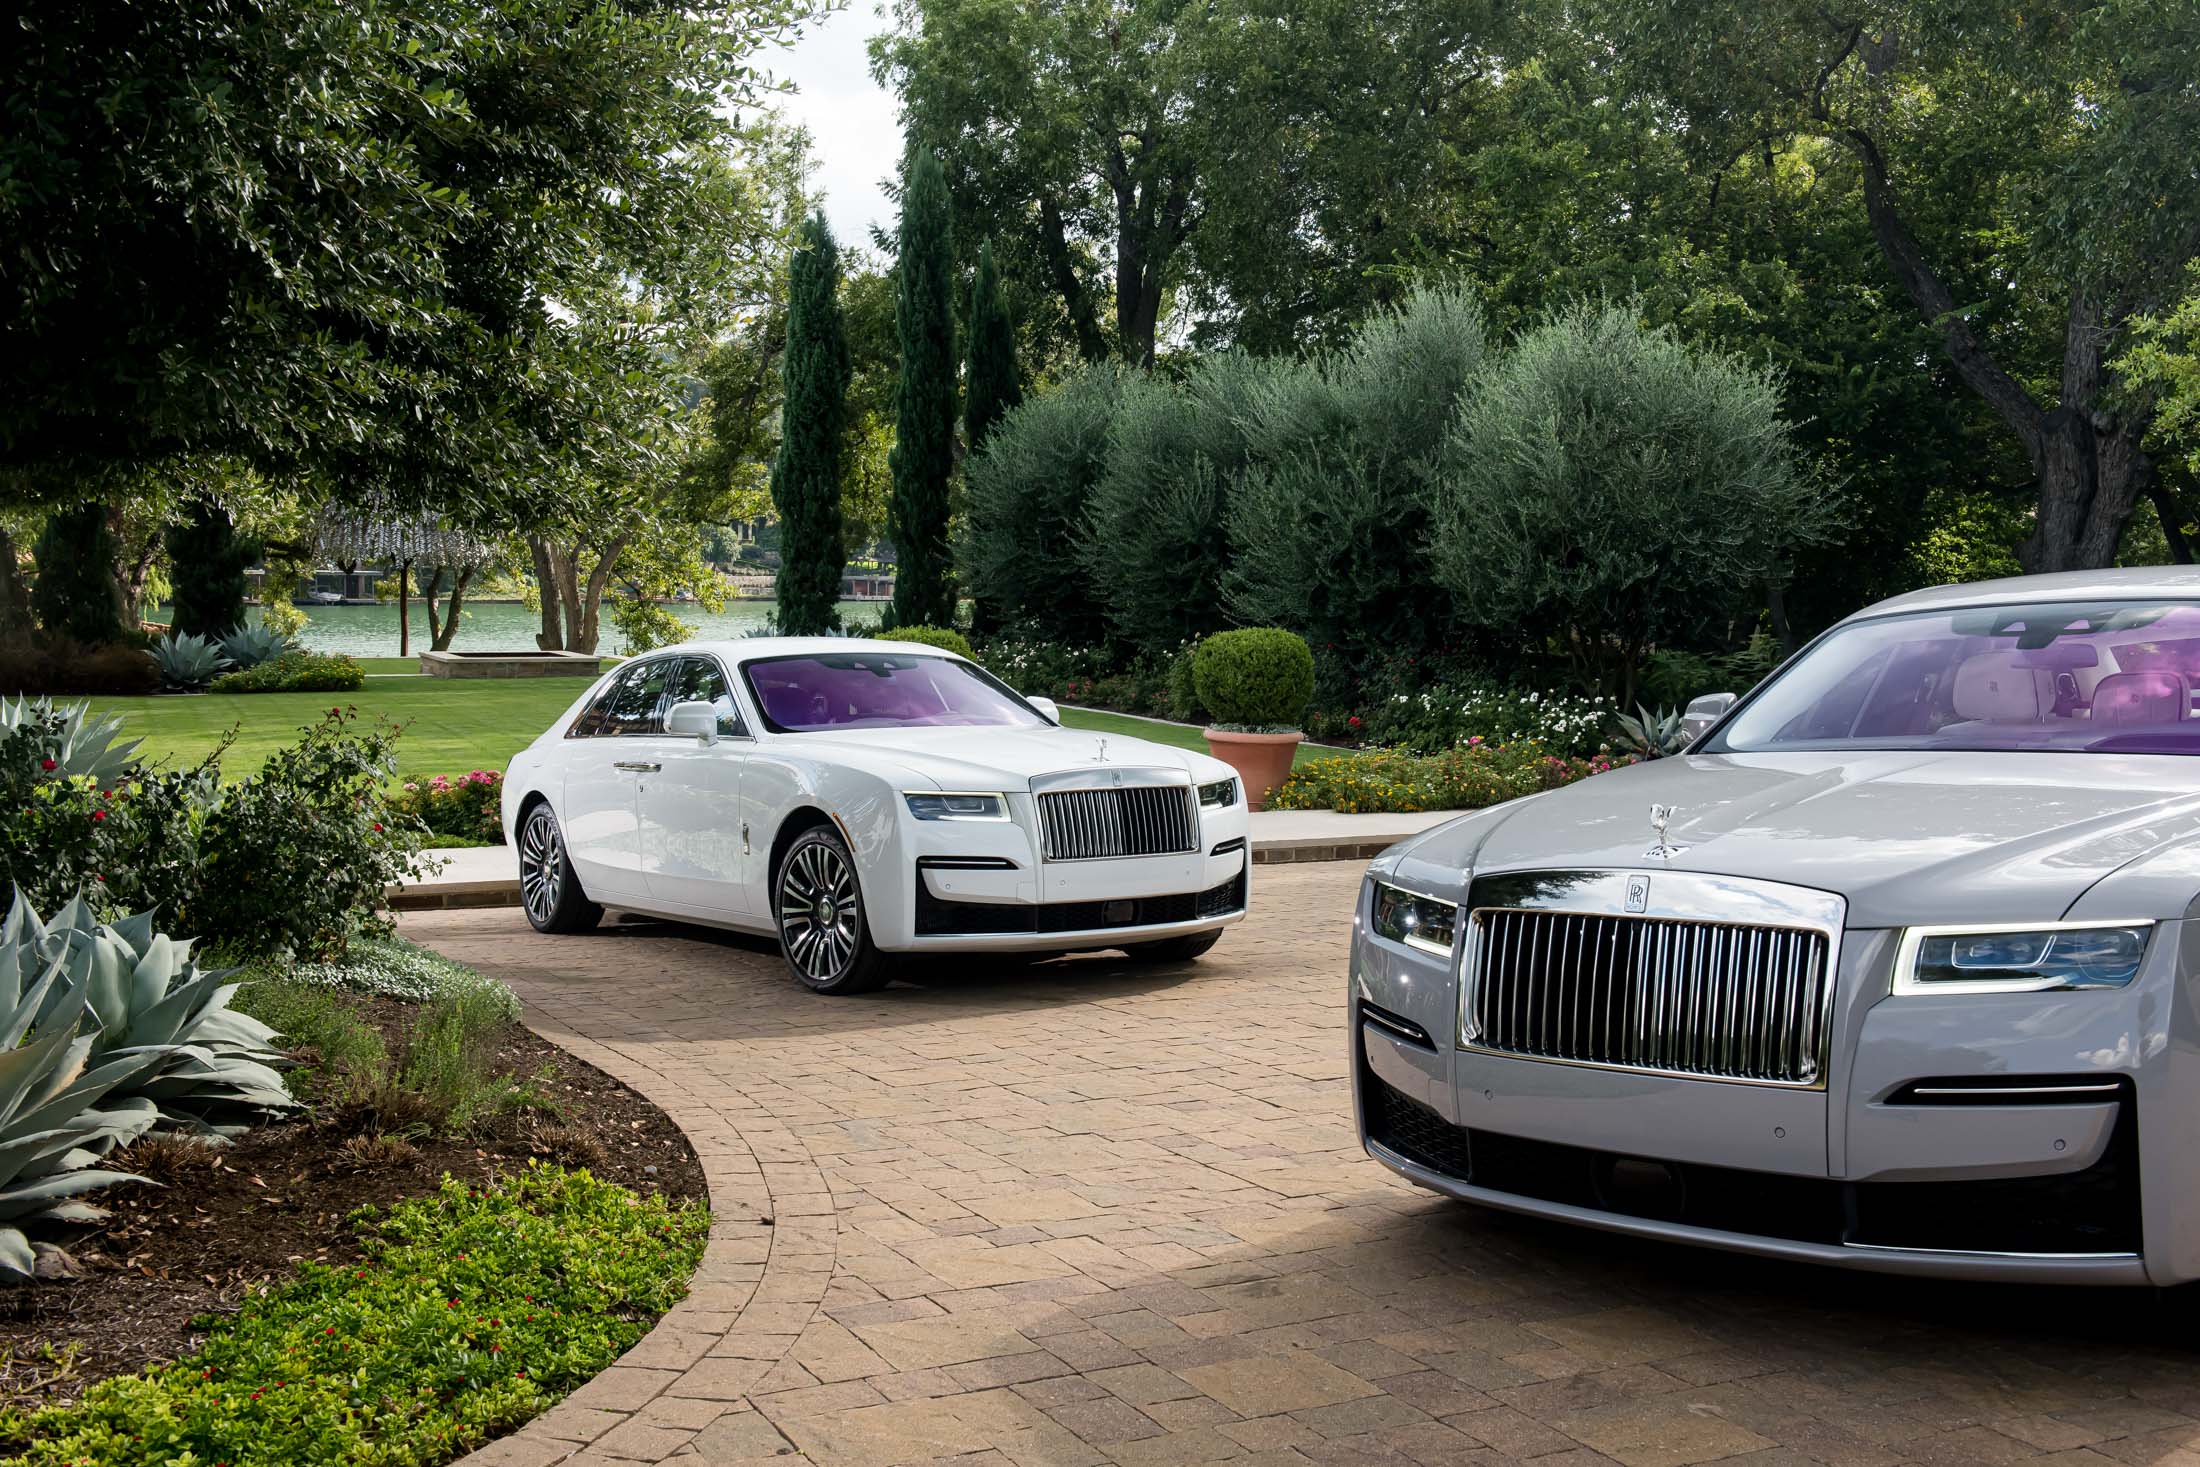 2021 Rolls-Royce Ghost Review: A Toned-Down $332,500 Sedan - Bloomberg